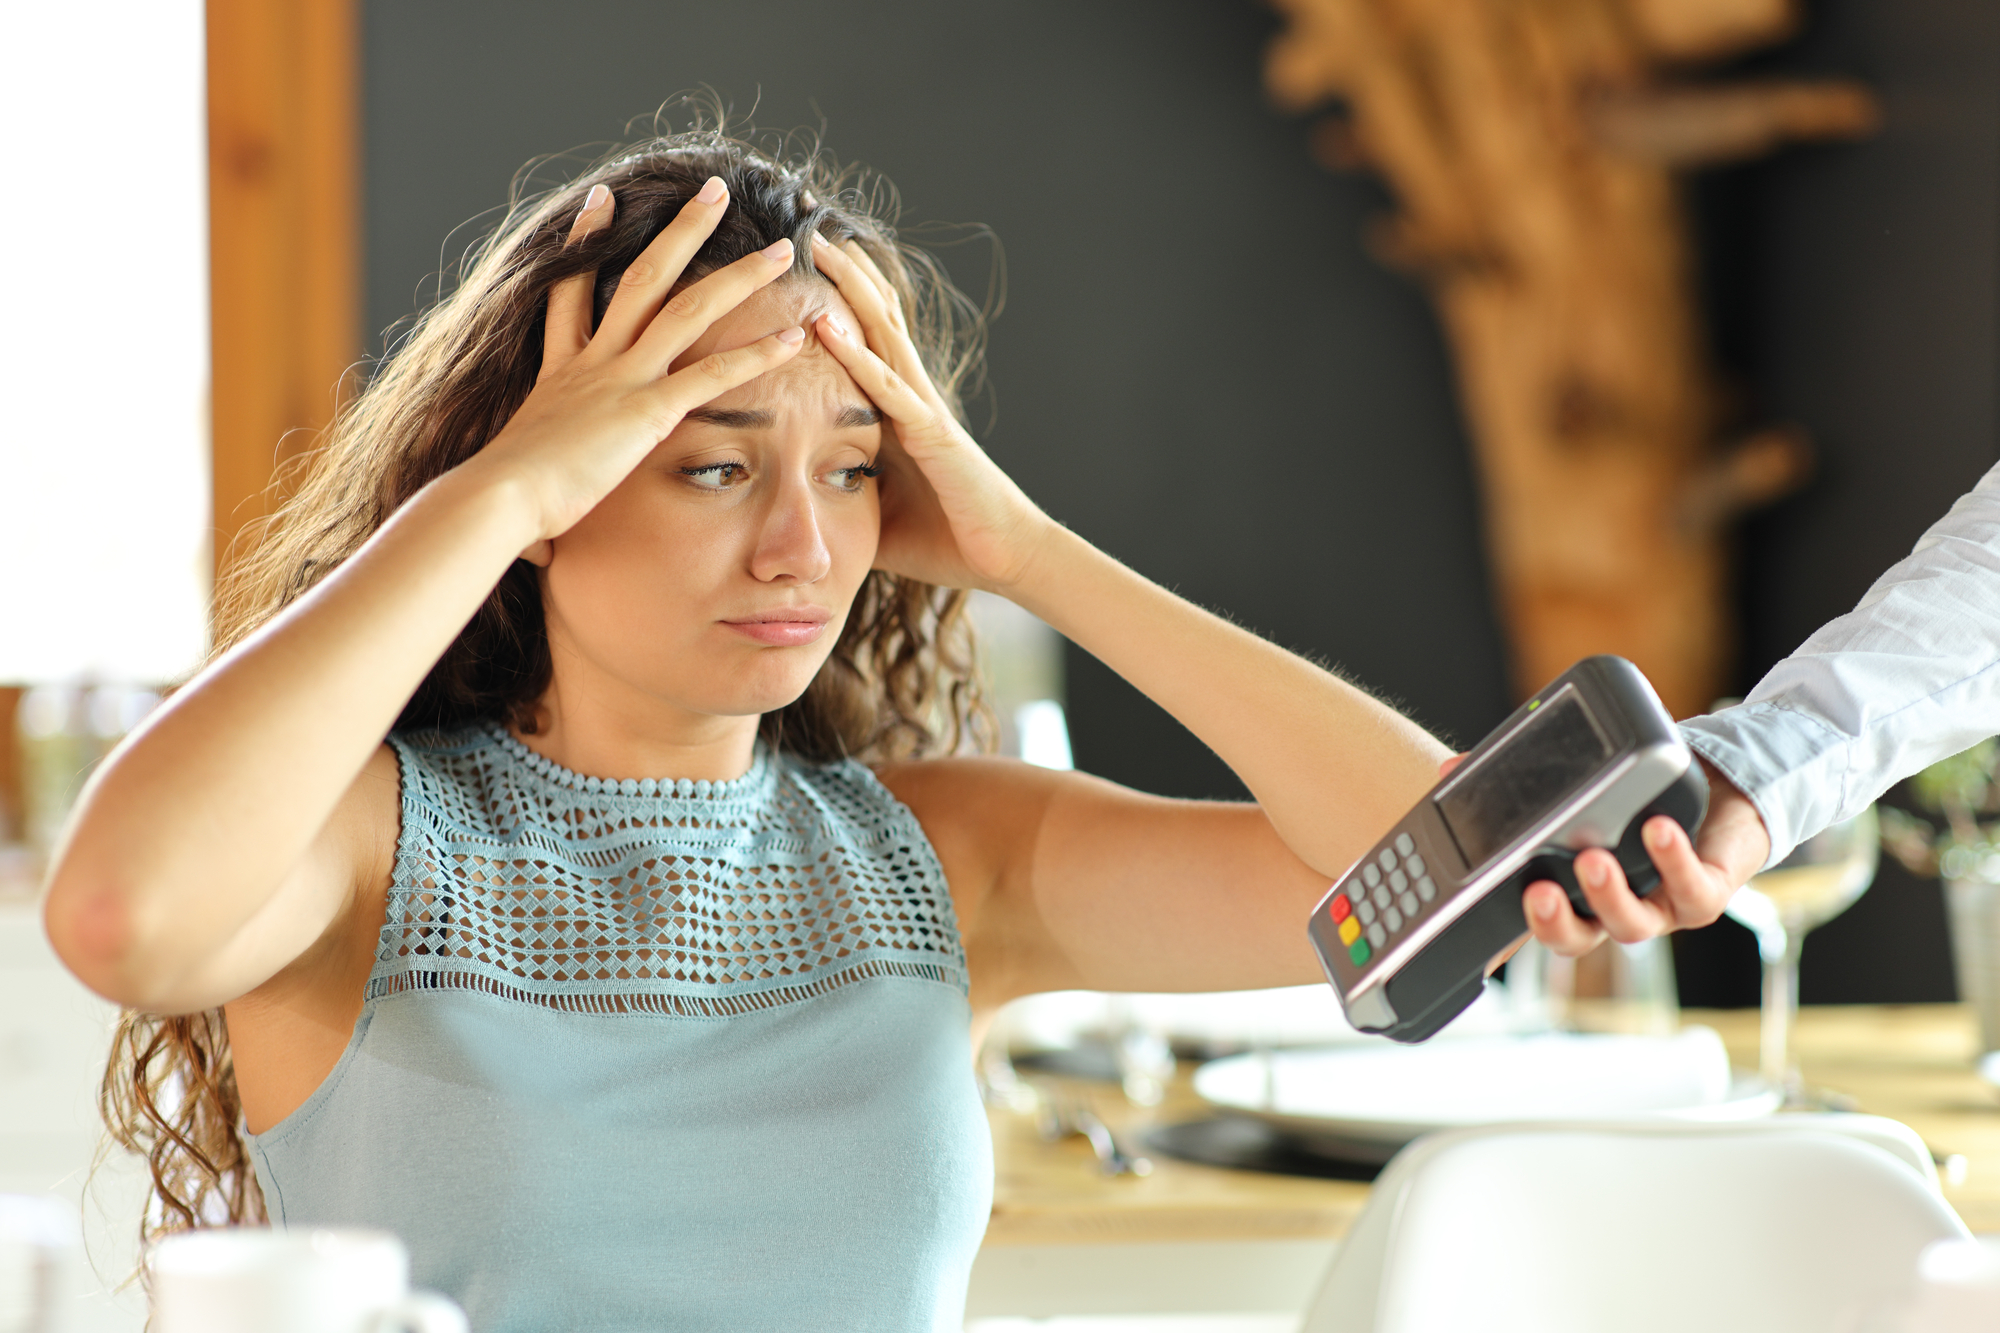 A worried person throws their hands on her head as a restaurant server extends a payment terminal toward them to pay the bill.